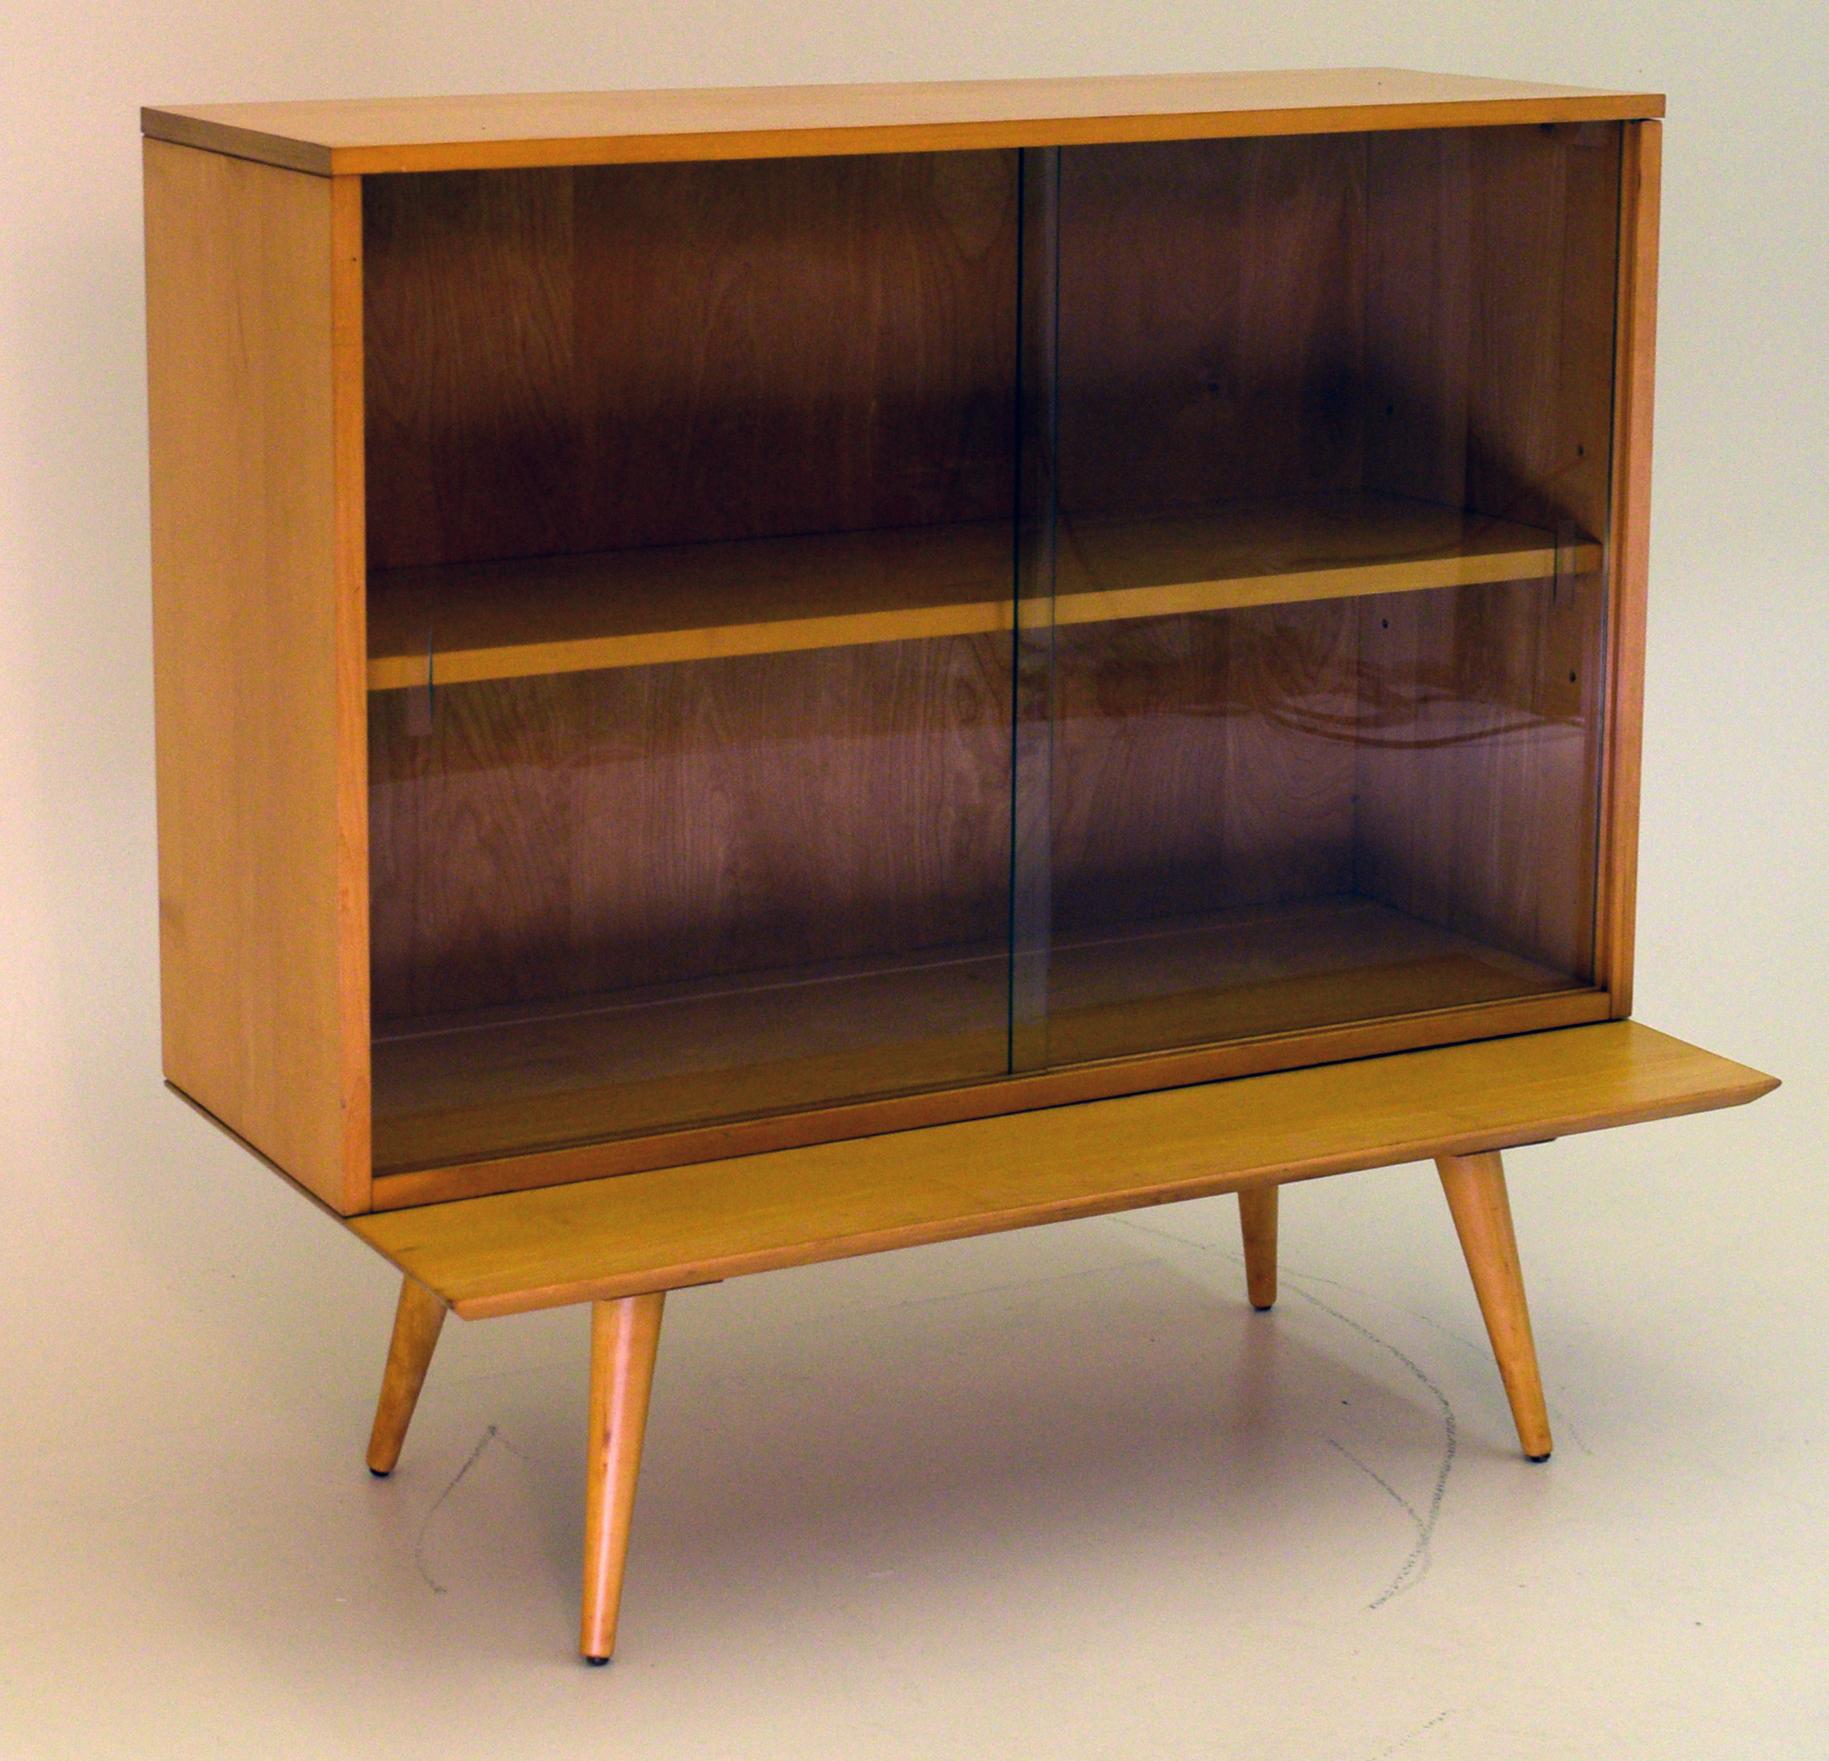 3 Piece Petite Modular Upright or Cabinet by Paul McCobb 1